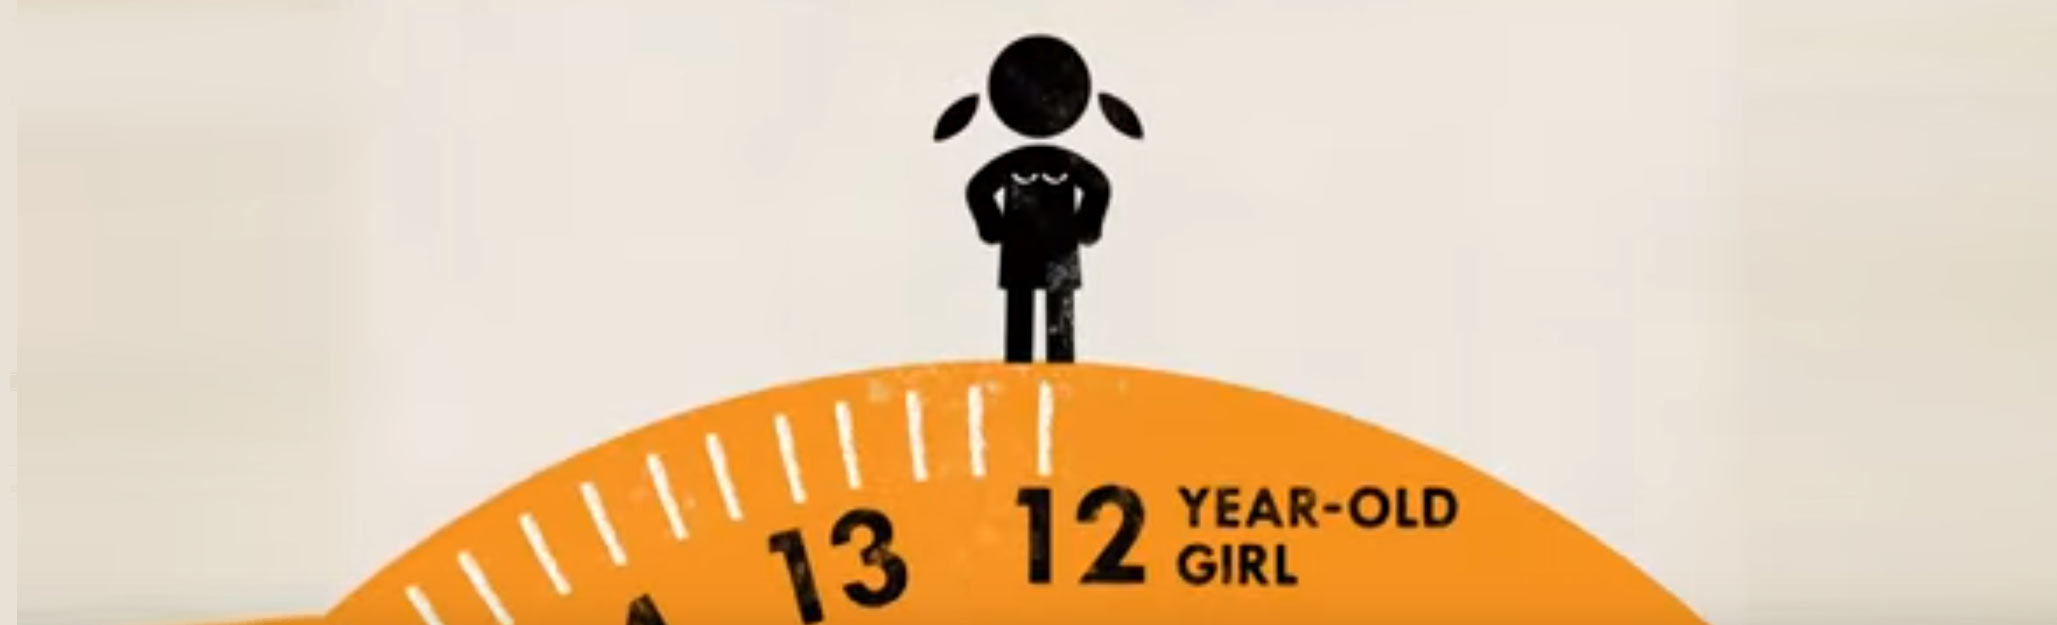 The Girl Effect - Video Infographic